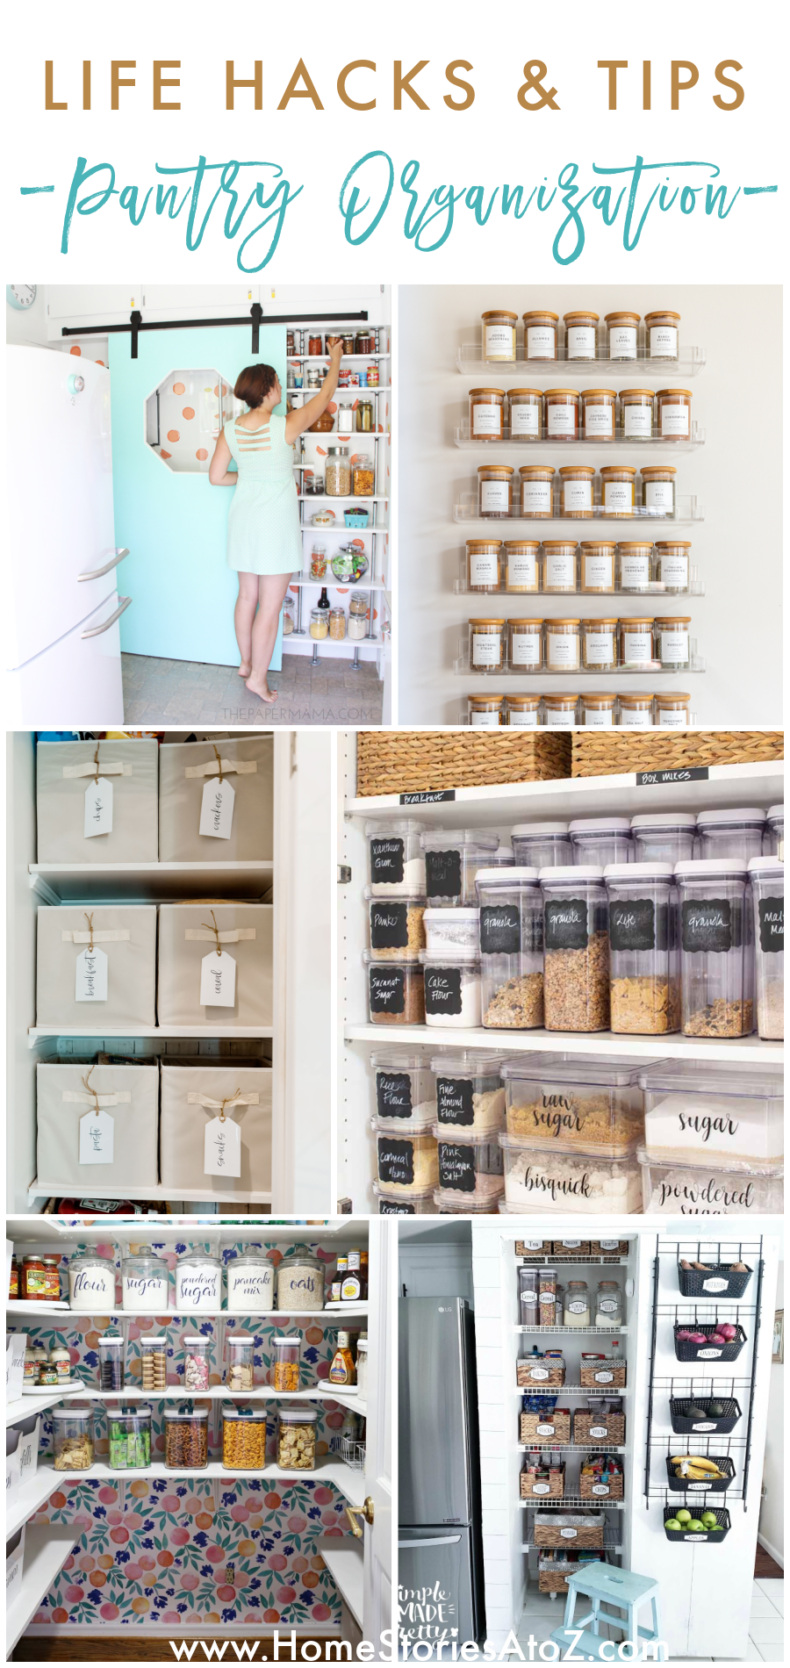 Pantry Organization by Home Stories A to Z #pantry #organize #pantryorganization